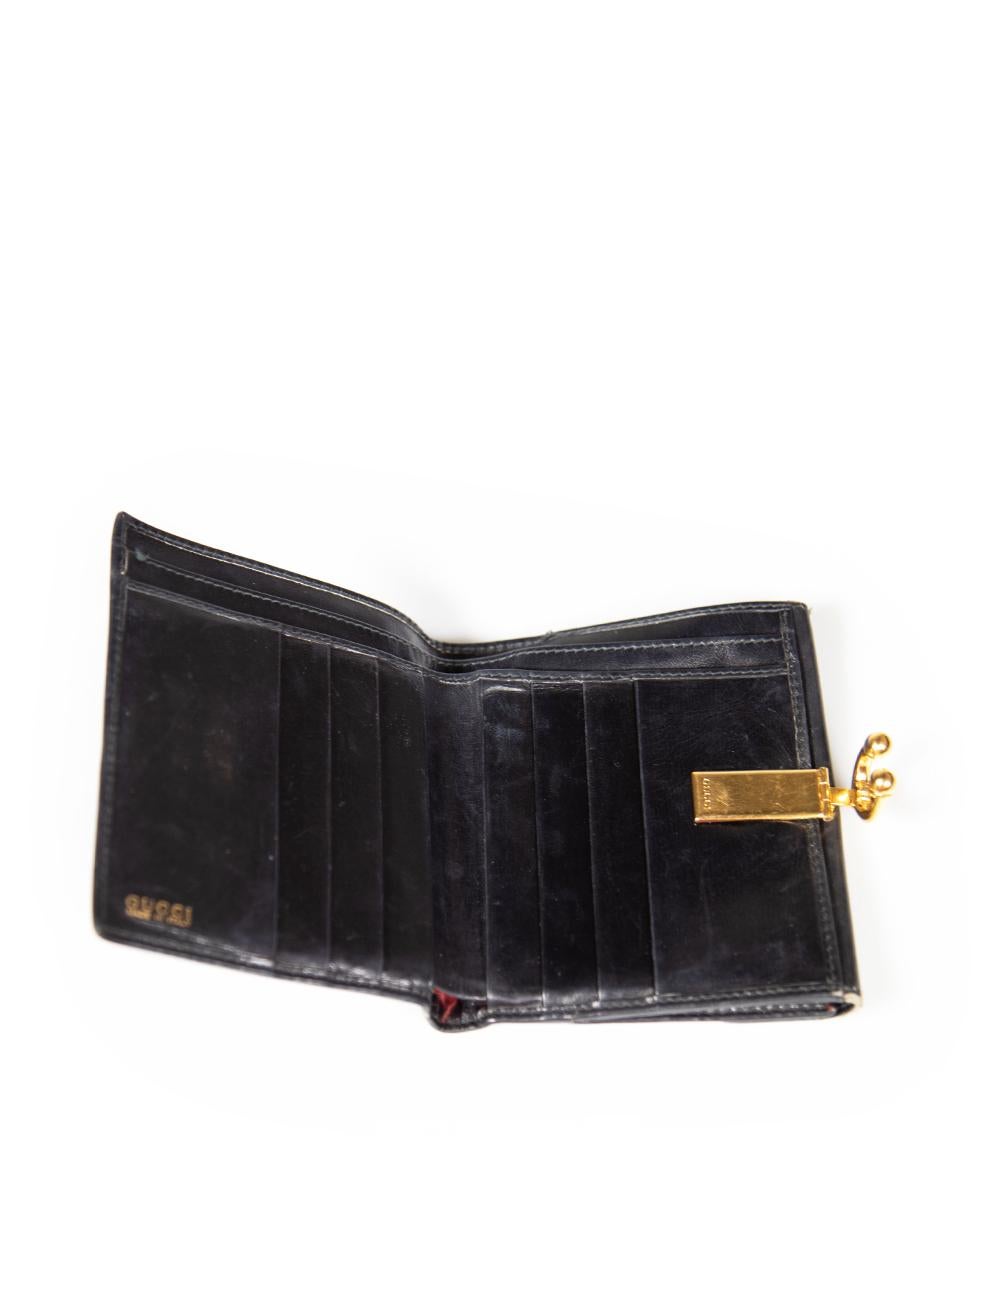 Gucci Black Leather Buckle Detail Bifold Wallet For Sale 1